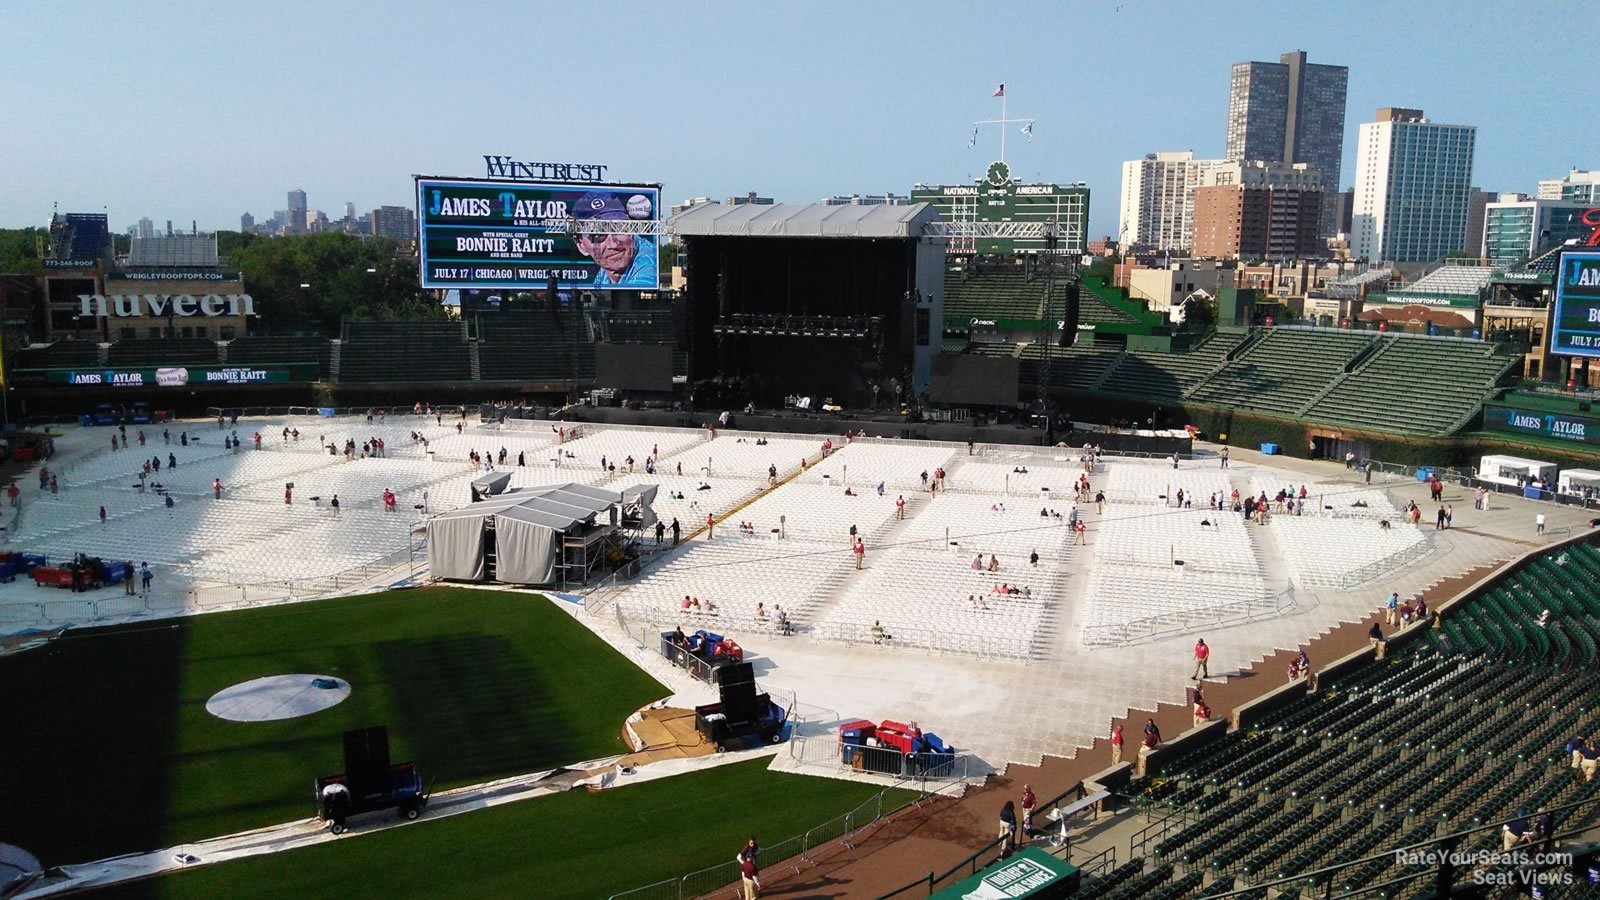 section 323, row 5 seat view  for concert - wrigley field